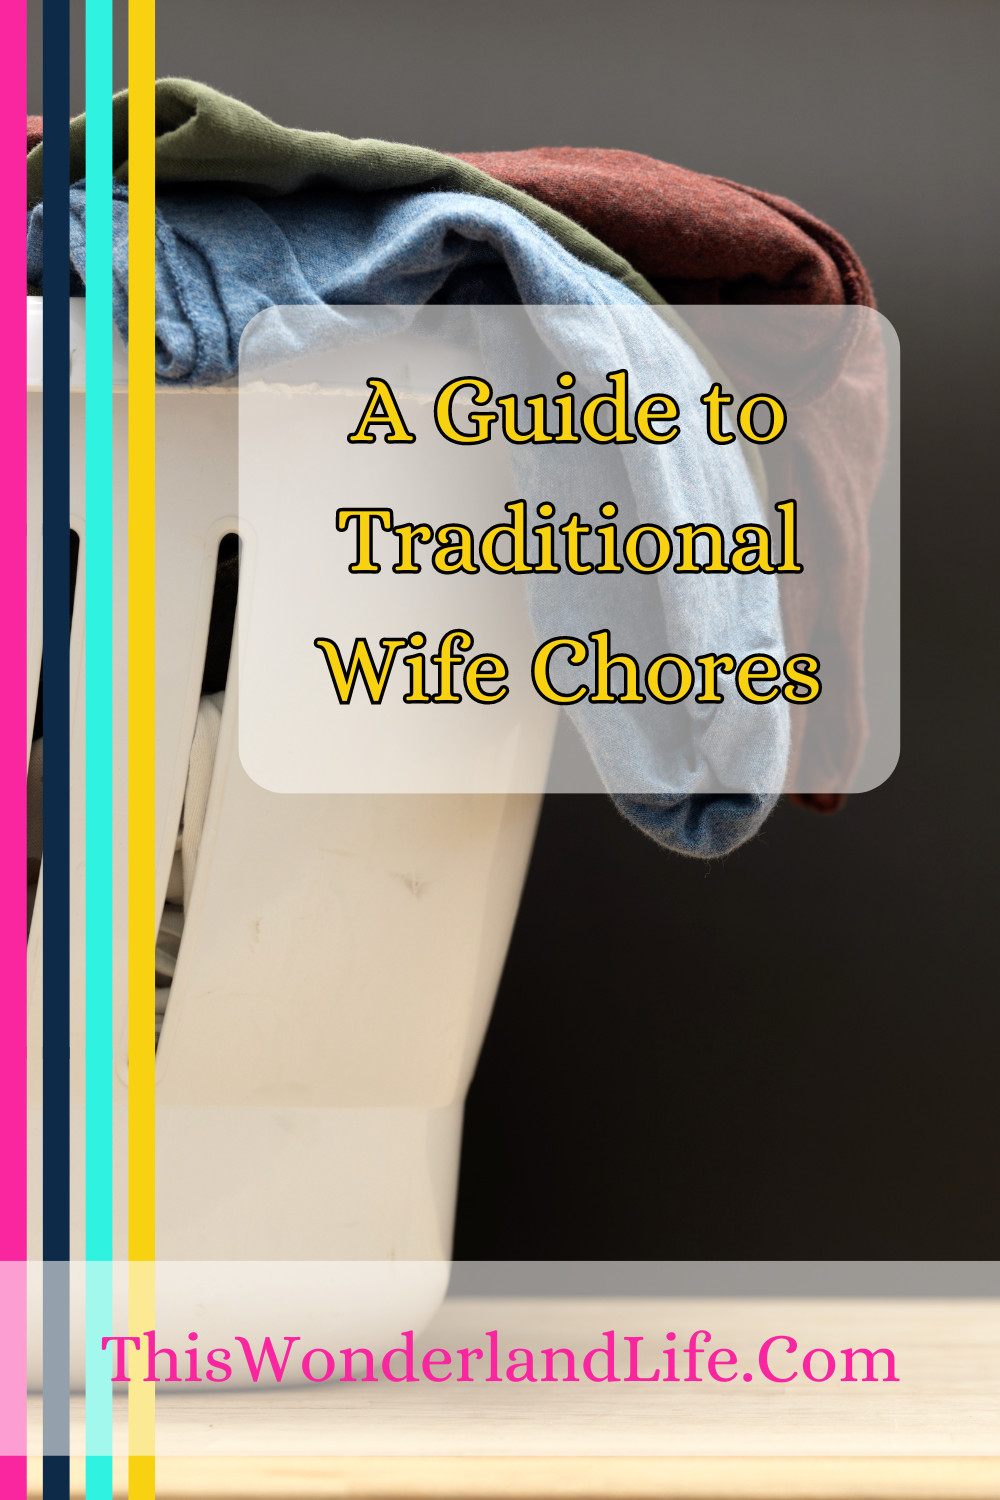 A Guide to Traditional Wife Chores